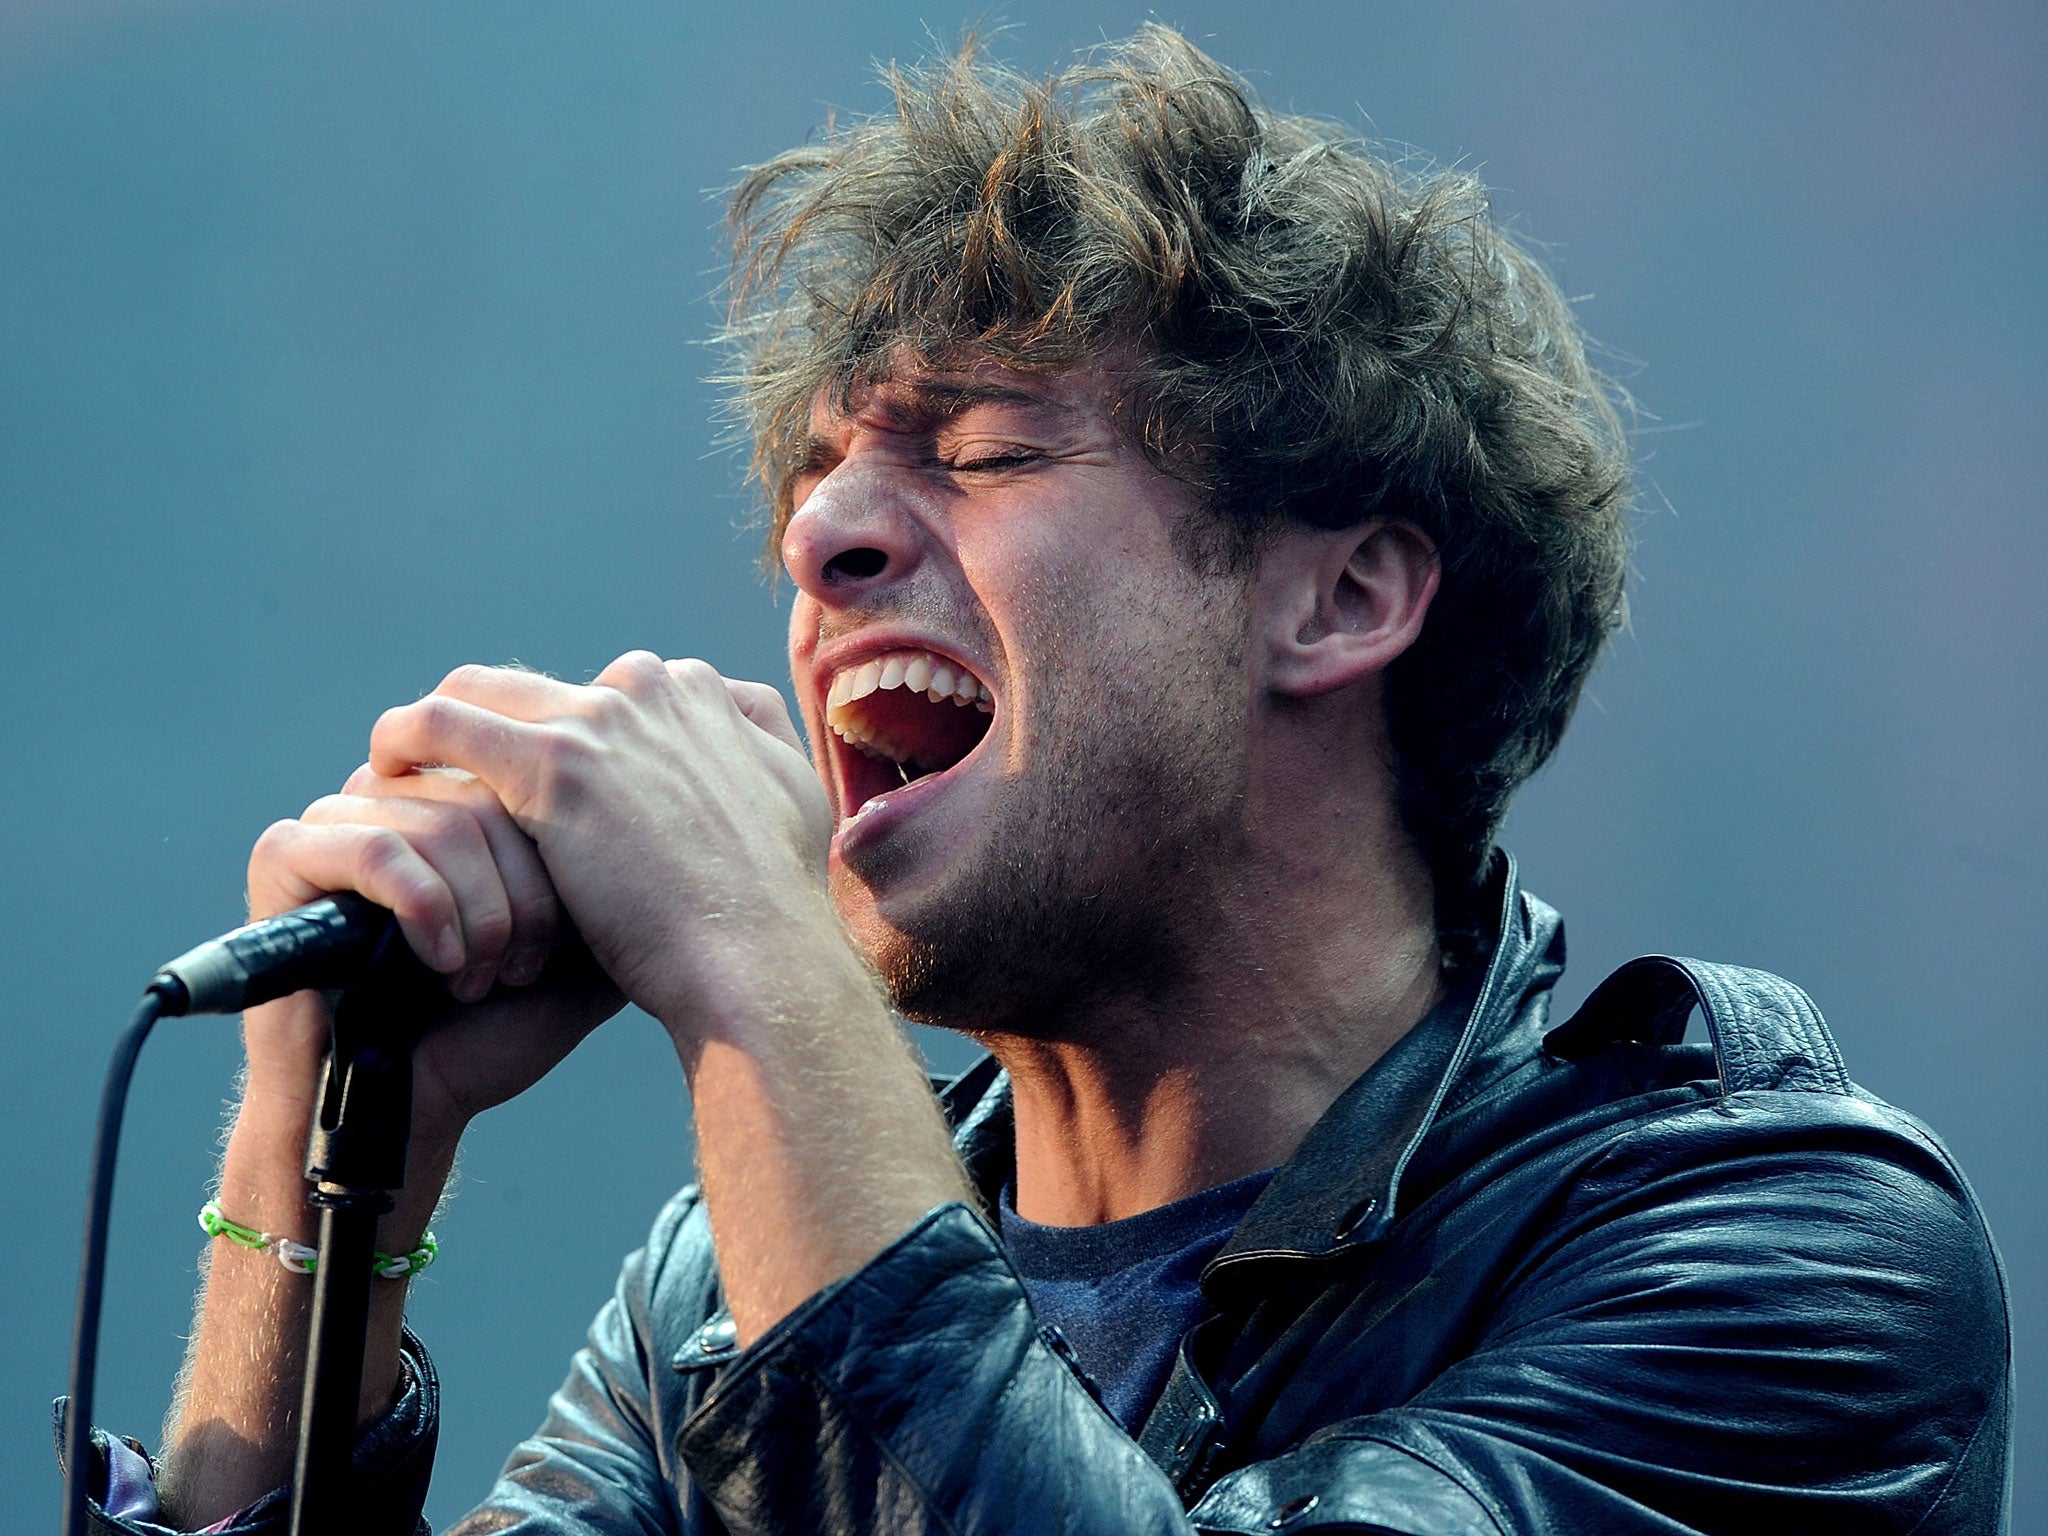 Paolo Nutini performs live at Radio 1's Big Weekend in May